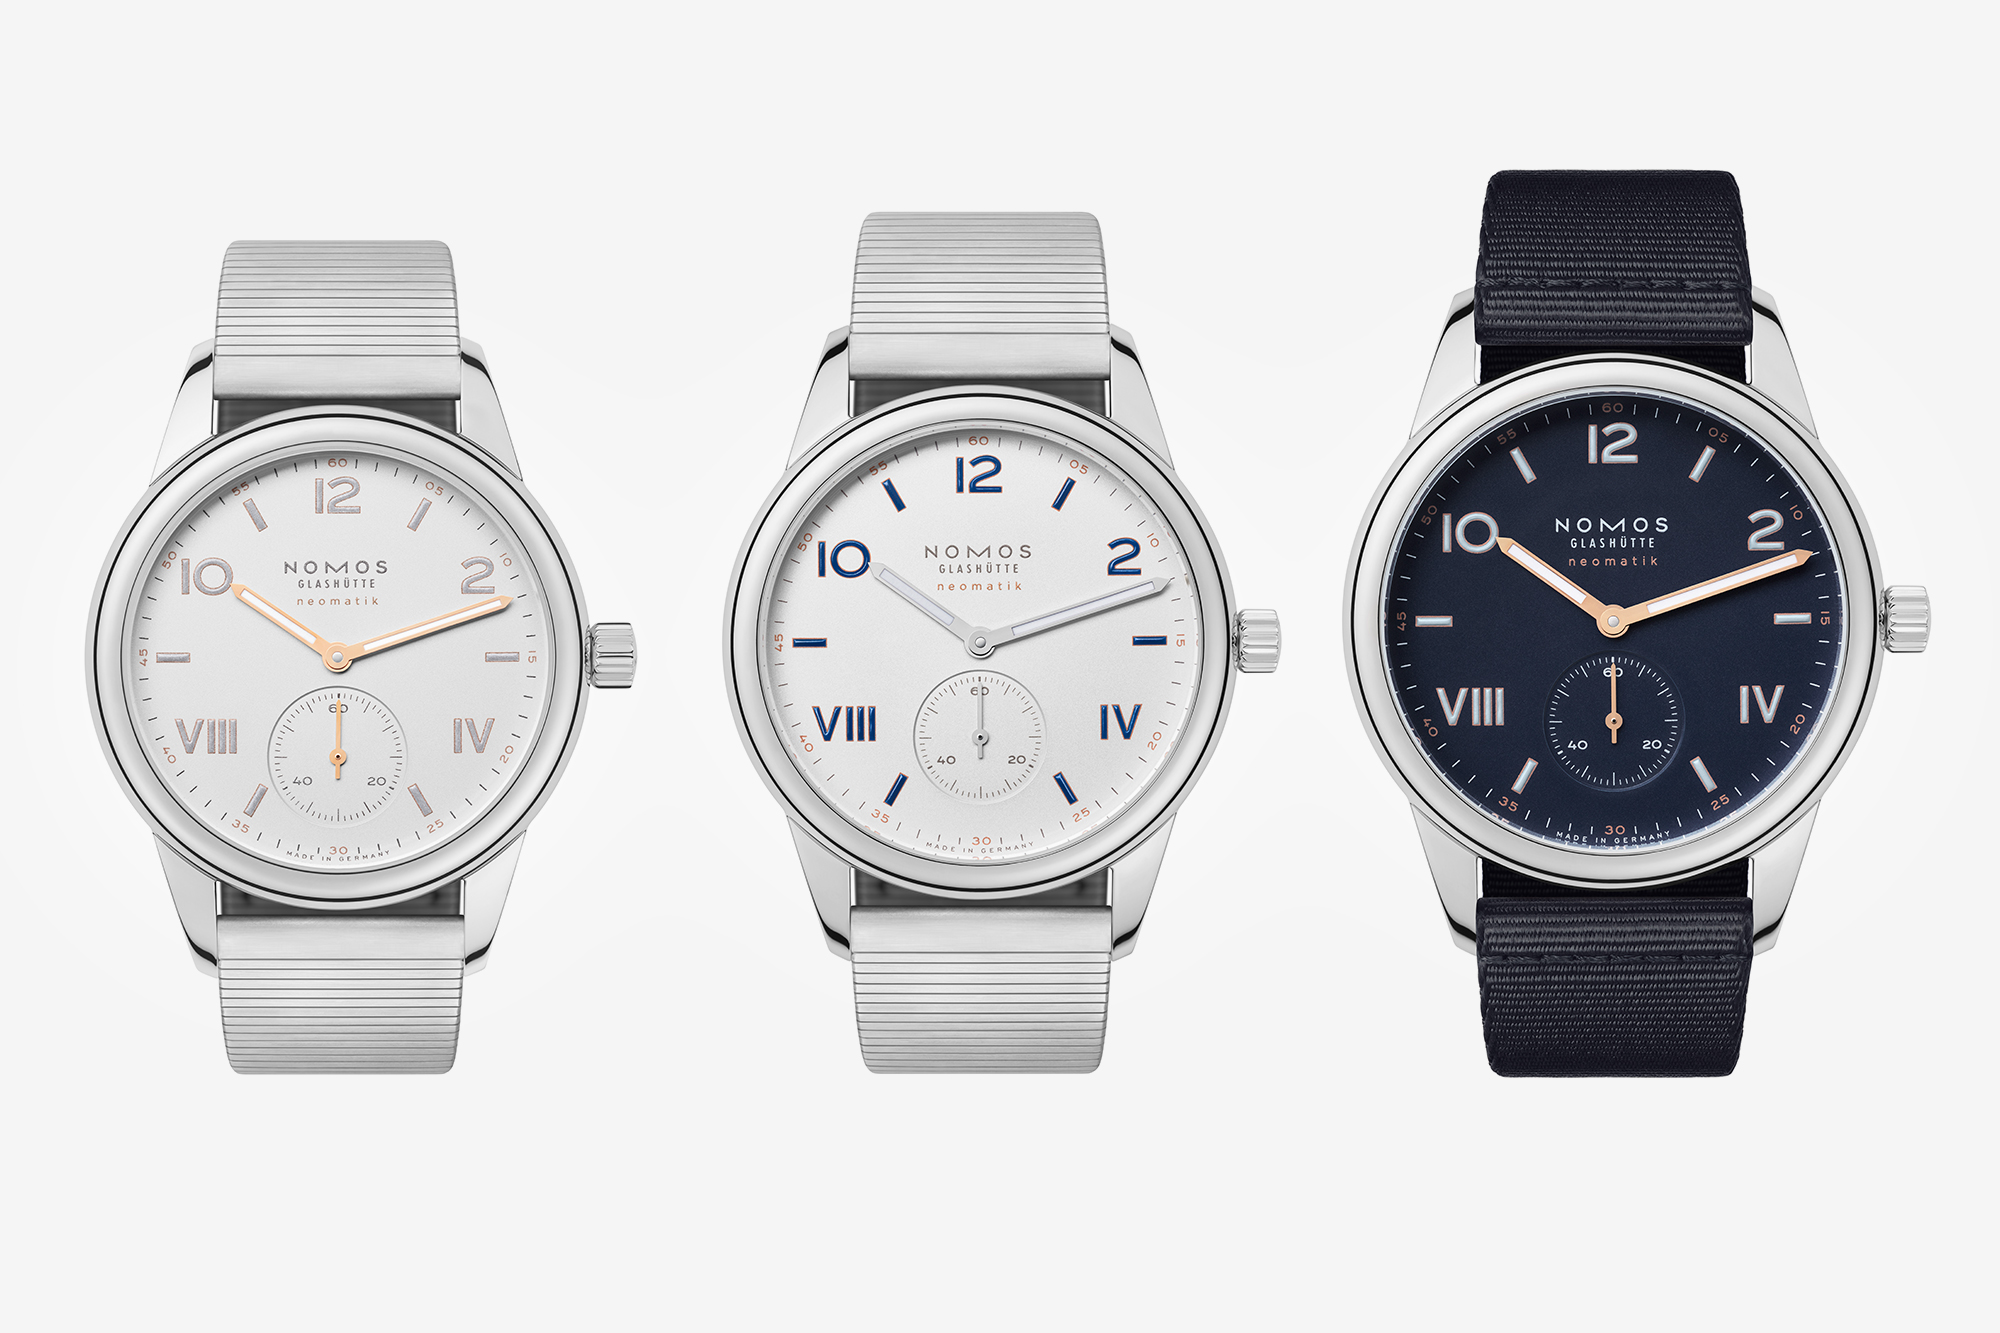 Nomos Unveils the Club Campus neomatik Collection and a New Steel Bracelet